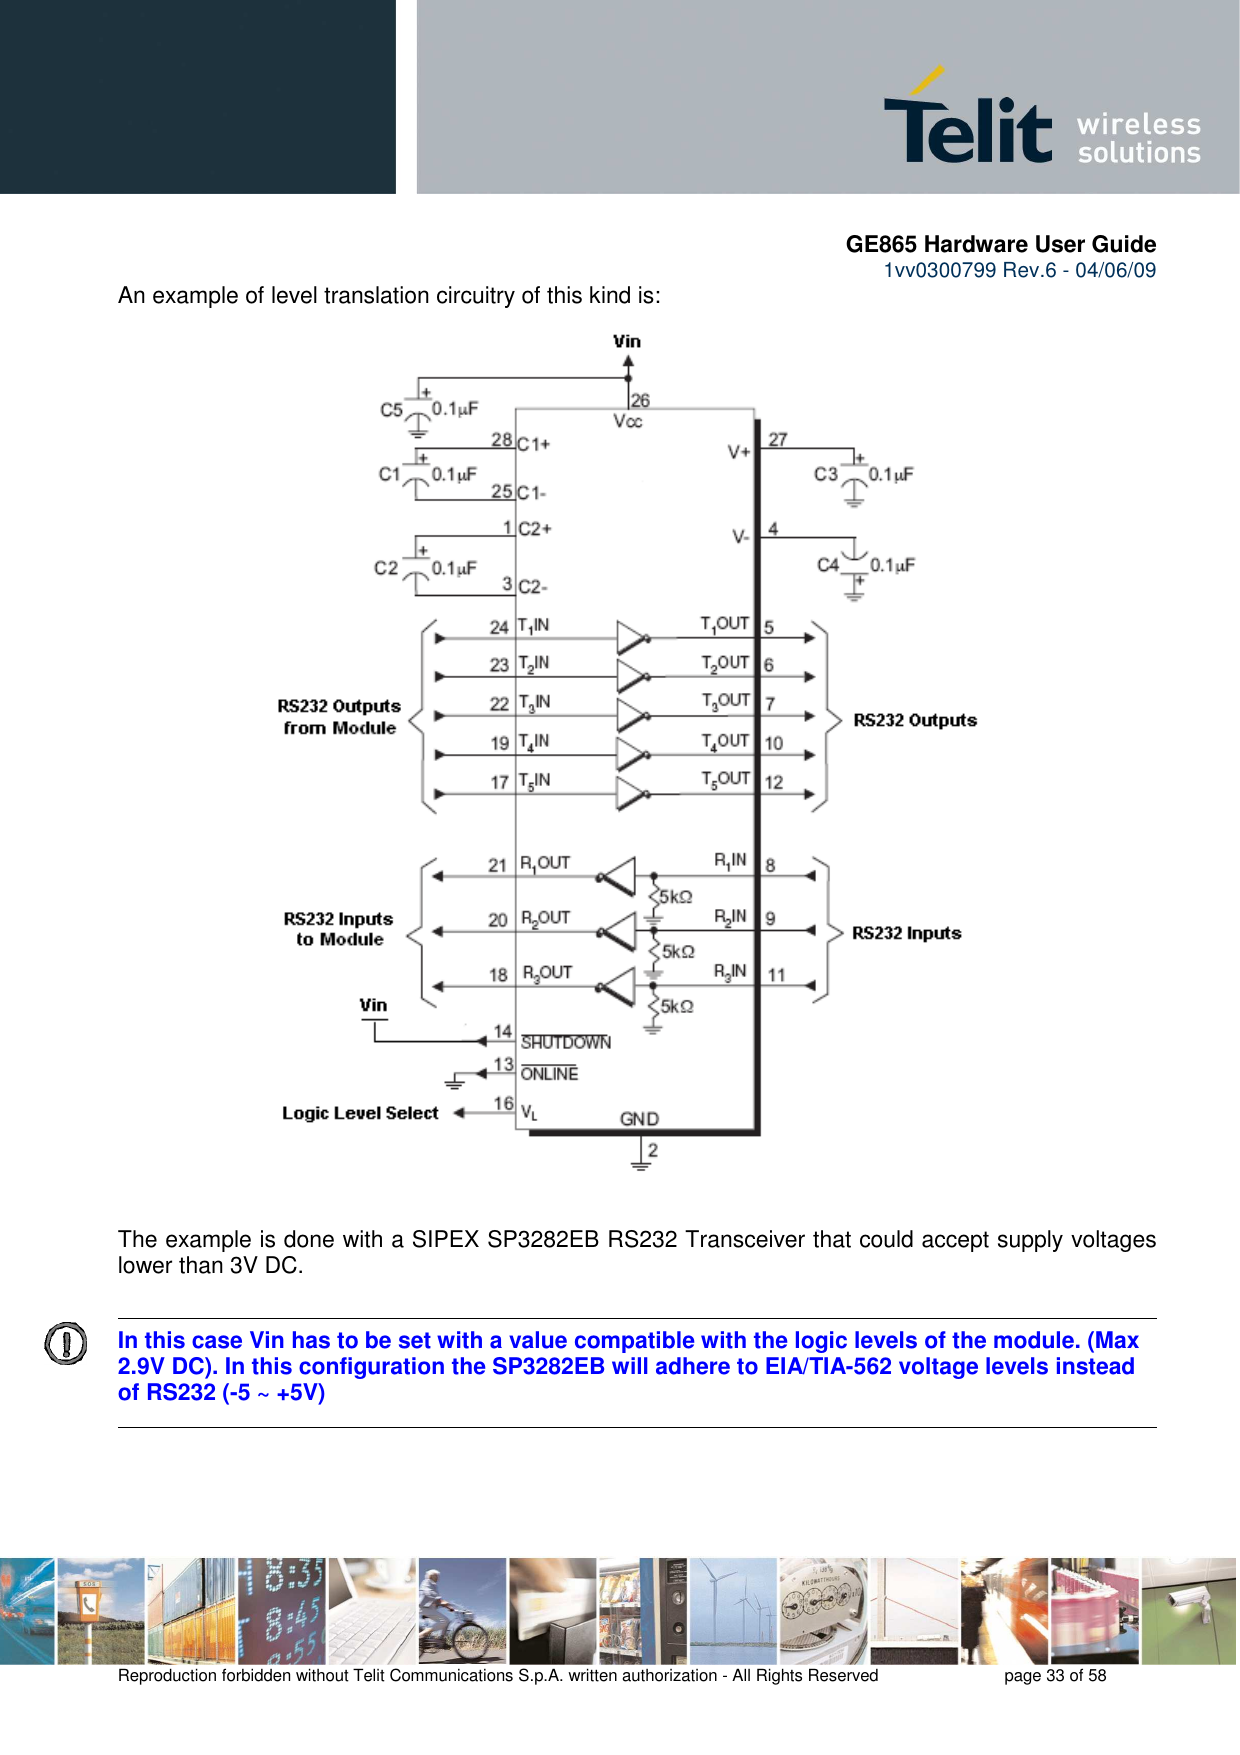       GE865 Hardware User Guide 1vv0300799 Rev.6 - 04/06/09      Reproduction forbidden without Telit Communications S.p.A. written authorization - All Rights Reserved    page 33 of 58  An example of level translation circuitry of this kind is:                                    The example is done with a SIPEX SP3282EB RS232 Transceiver that could accept supply voltages lower than 3V DC.      In this case Vin has to be set with a value compatible with the logic levels of the module. (Max 2.9V DC). In this configuration the SP3282EB will adhere to EIA/TIA-562 voltage levels instead of RS232 (-5 ~ +5V) 